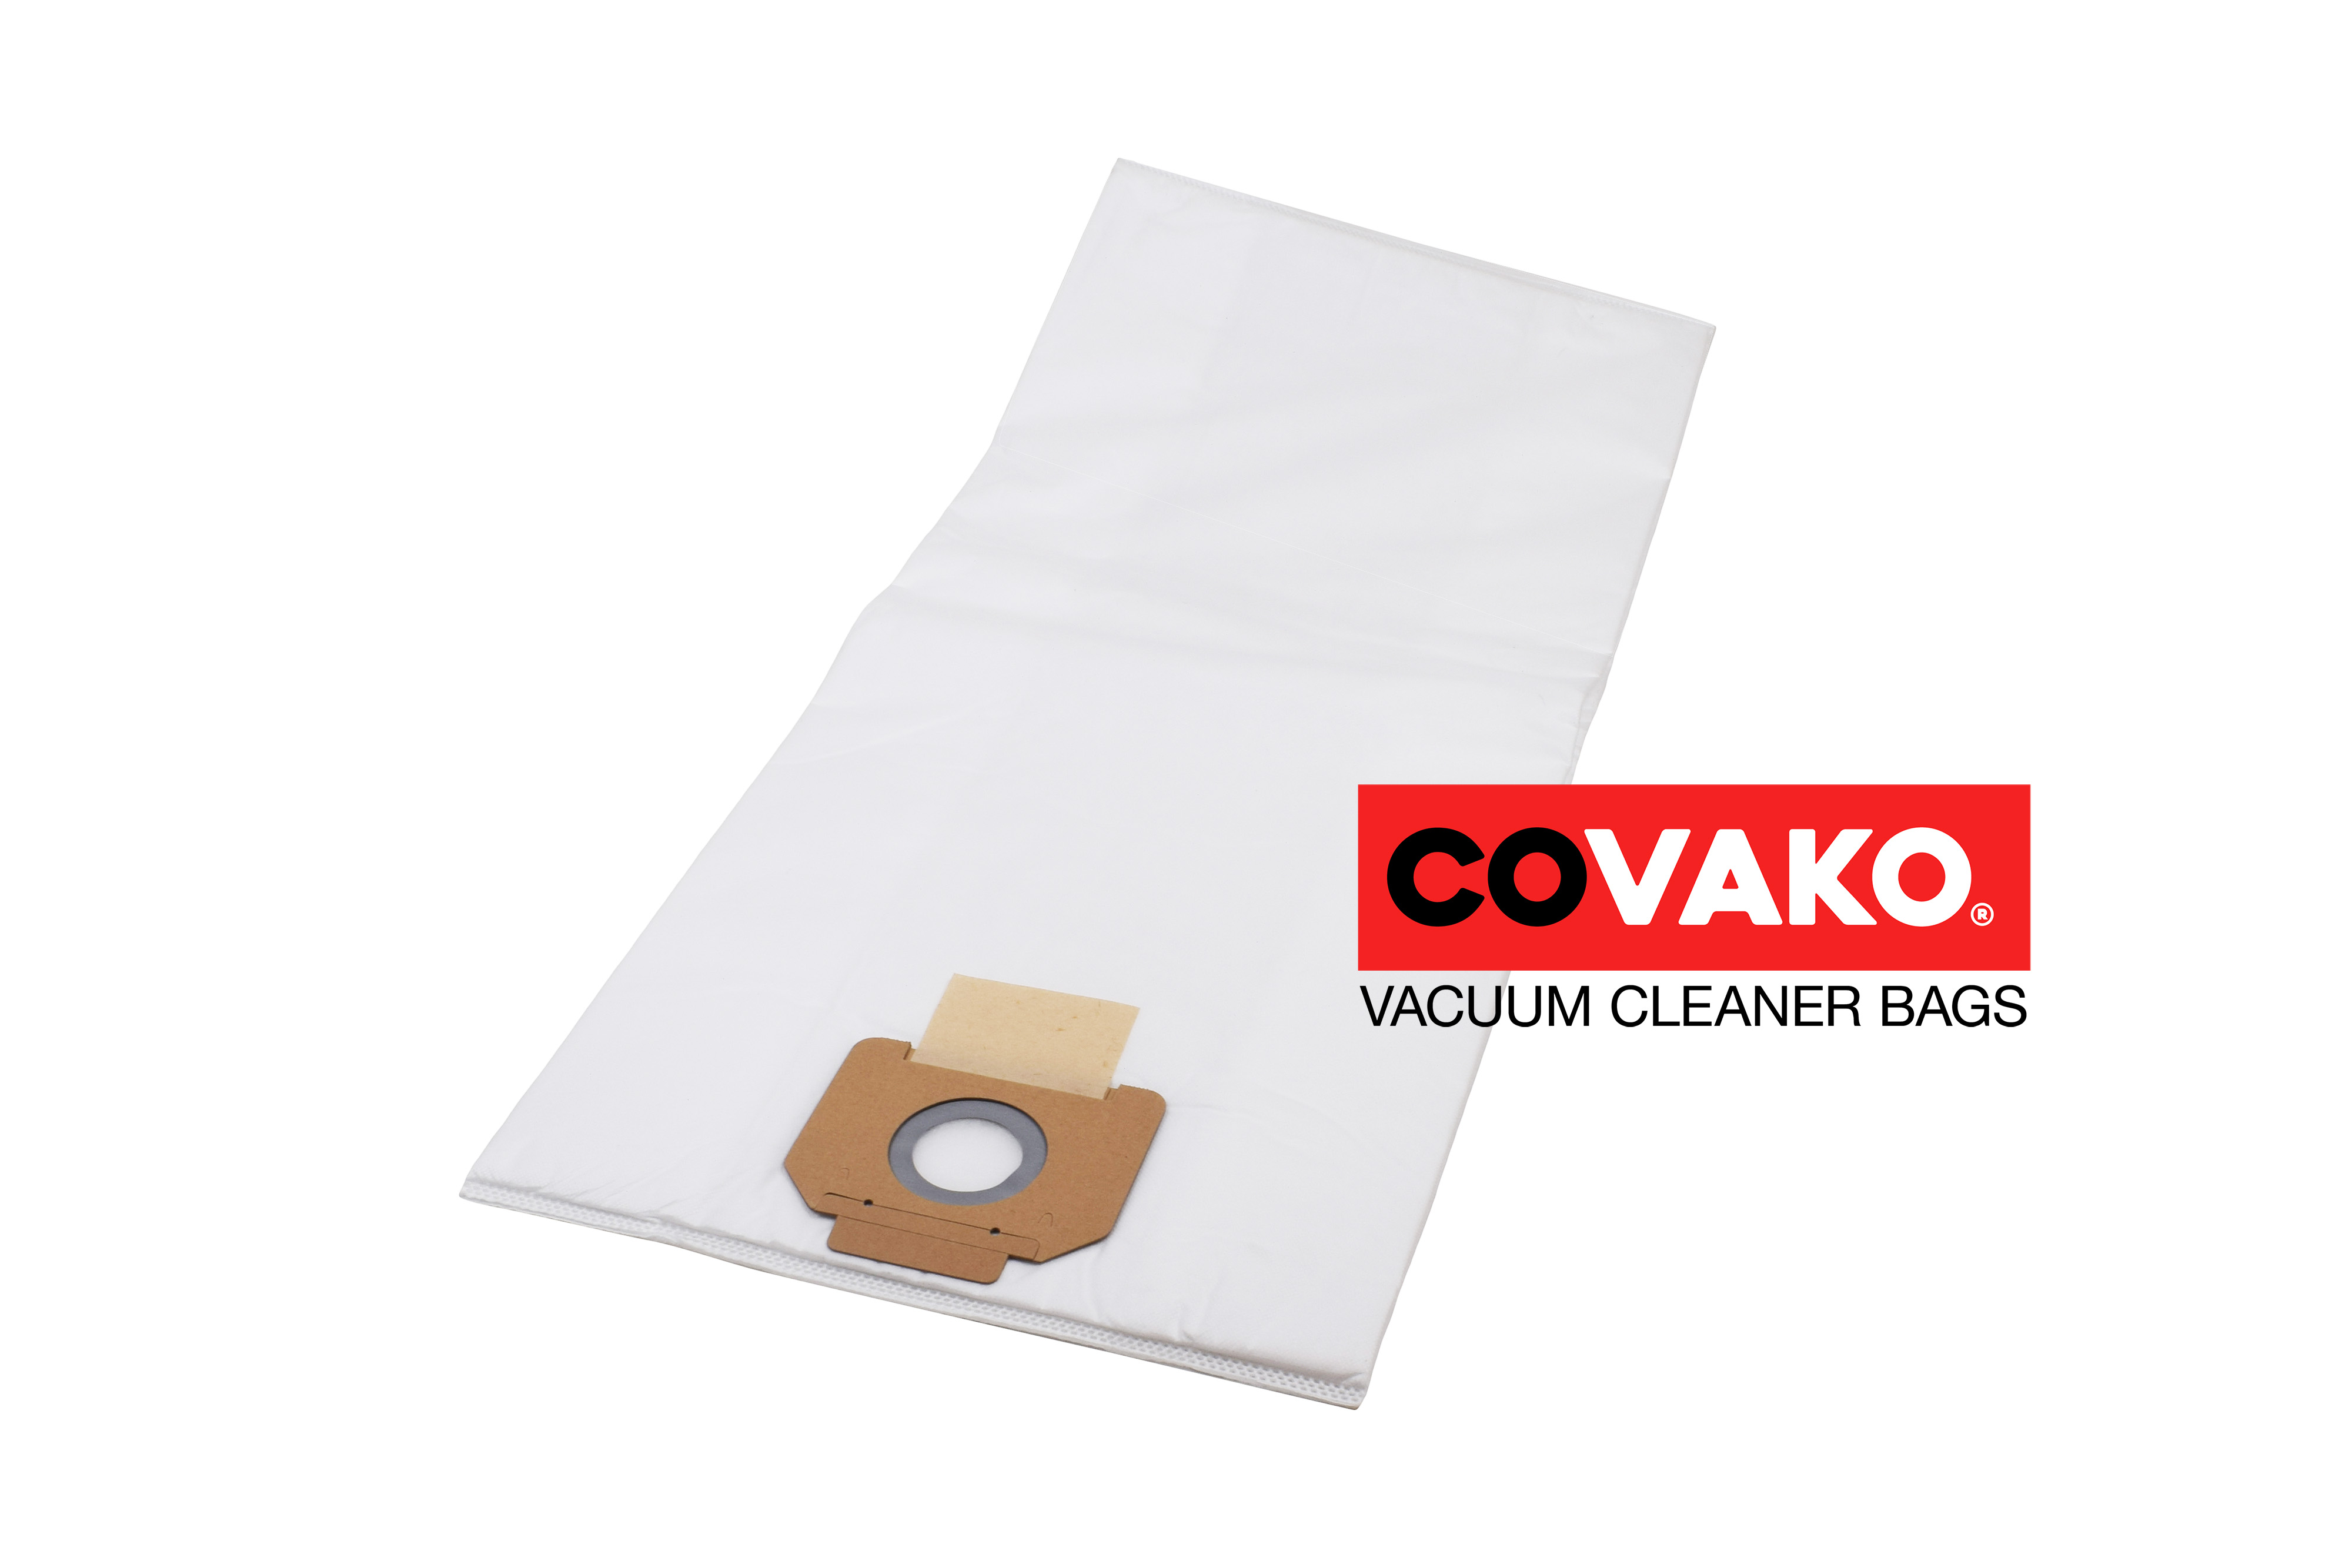 DiBo Windly Compact 429 M IPC / Synthesis - DiBo vacuum cleaner bags